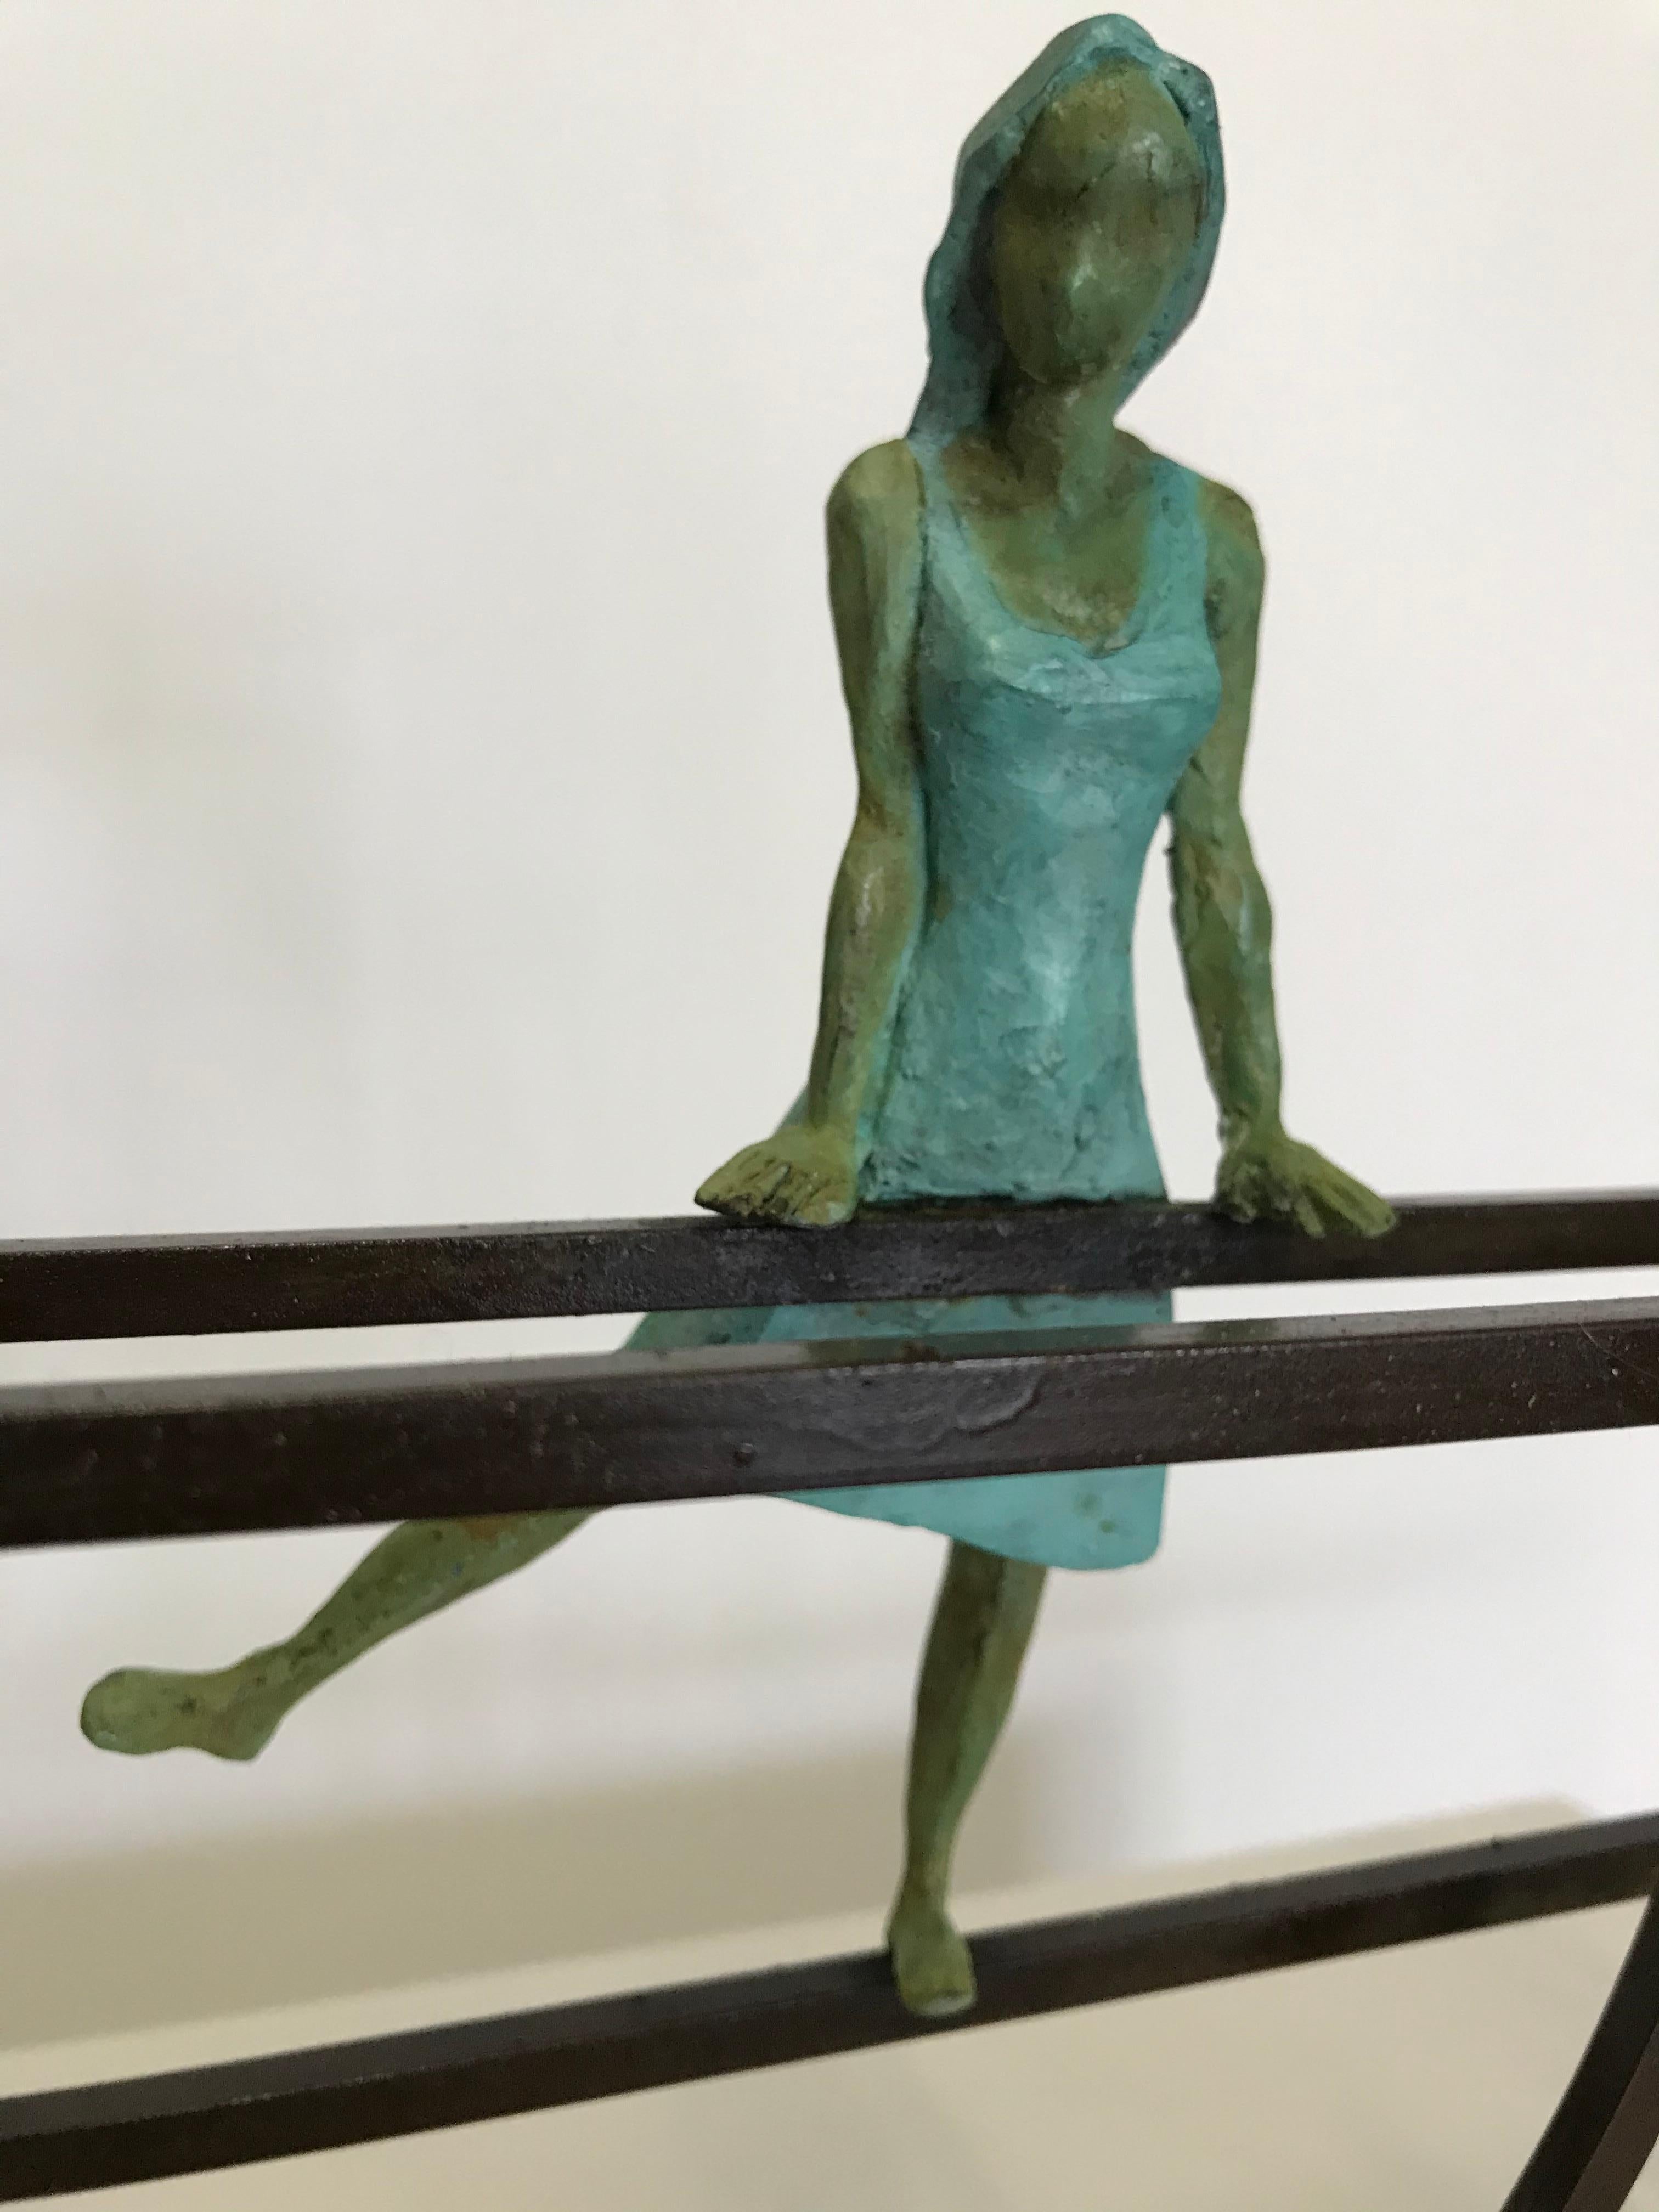 Rosette is a bronze sculpture with green patina, it is connected to a steel base. The edition size is 50. This sculpture stands on shelf as well as be hung on wall.  

Joan’s latest sculpture series of female figures brings an out-of-the-box